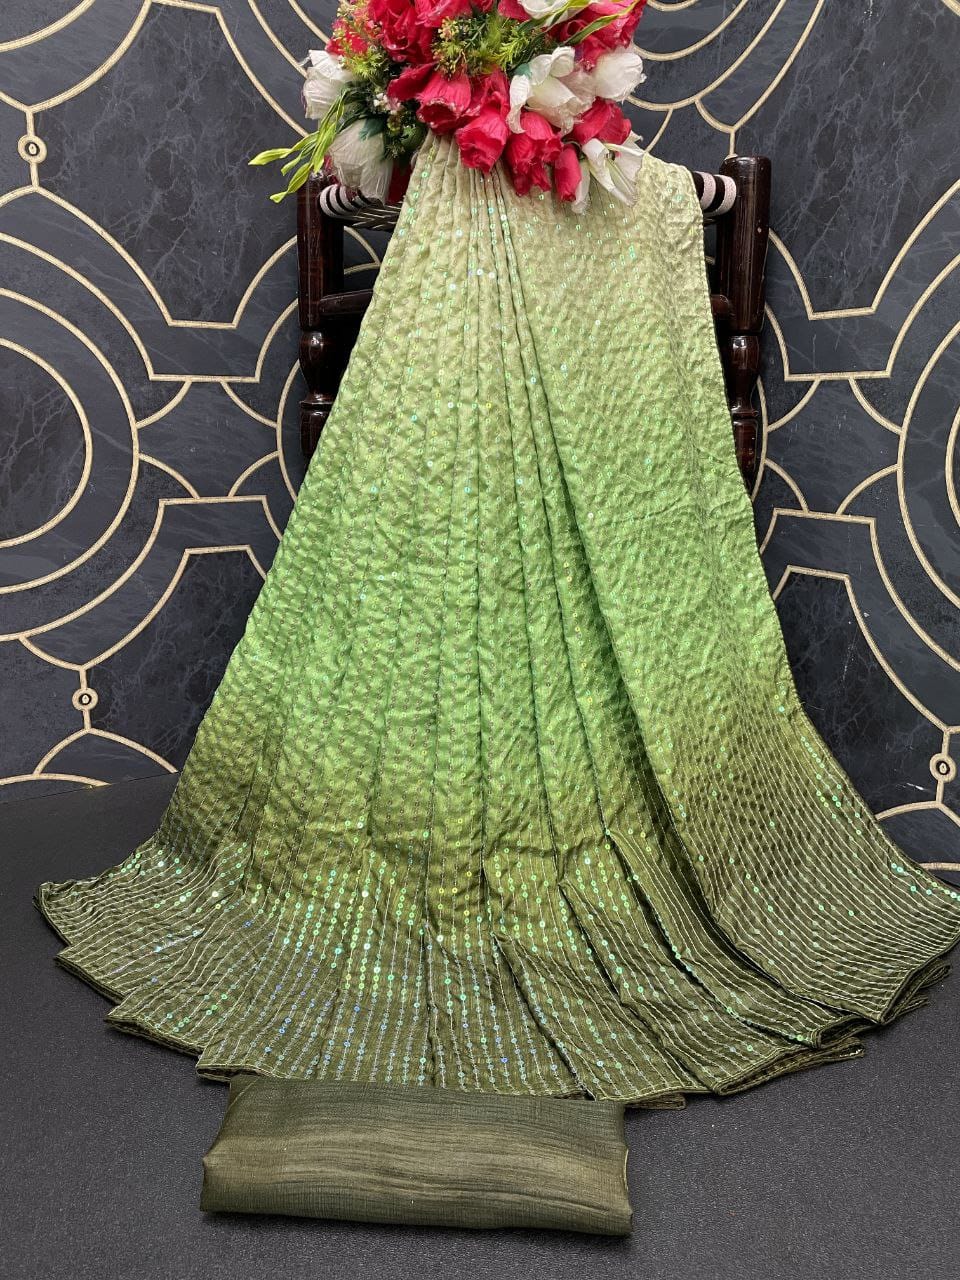 Beautiful Sequance Embroidery Green Saree For Women